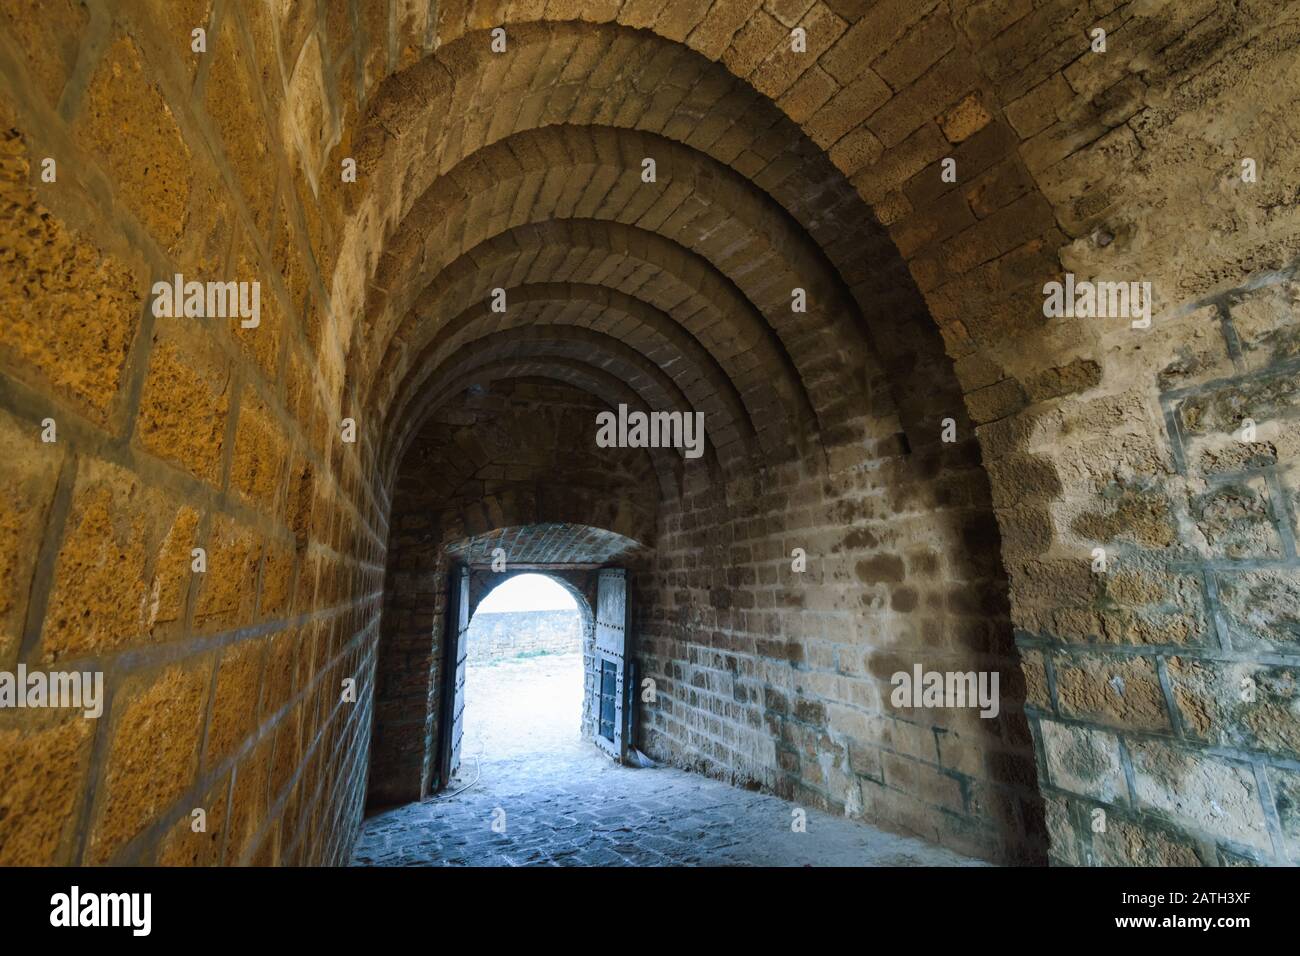 The spiral arches inside the ancient Portuguese built Diu Fort in the island of Diu in India. Stock Photo